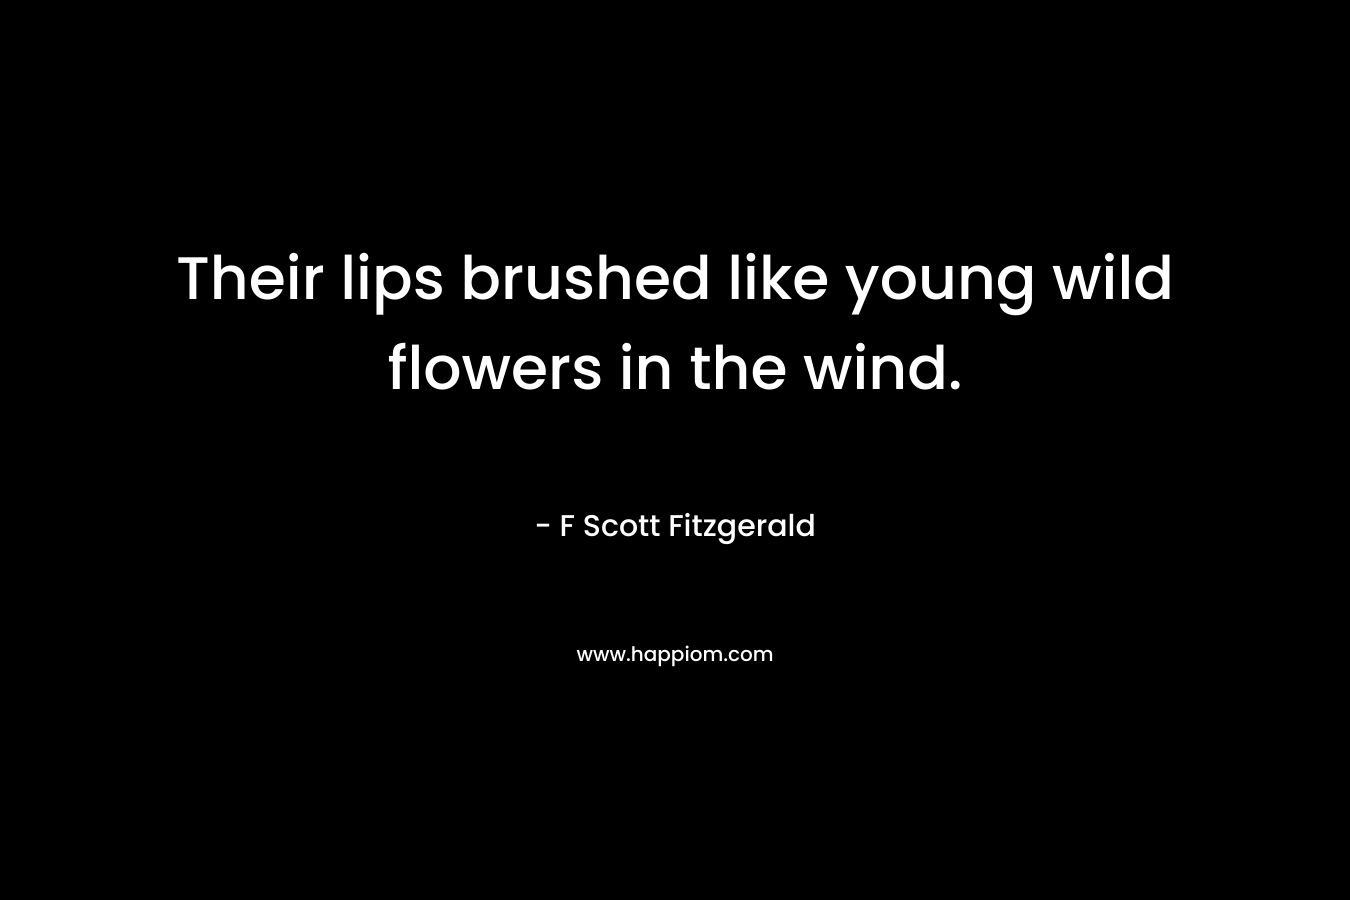 Their lips brushed like young wild flowers in the wind. – F Scott Fitzgerald